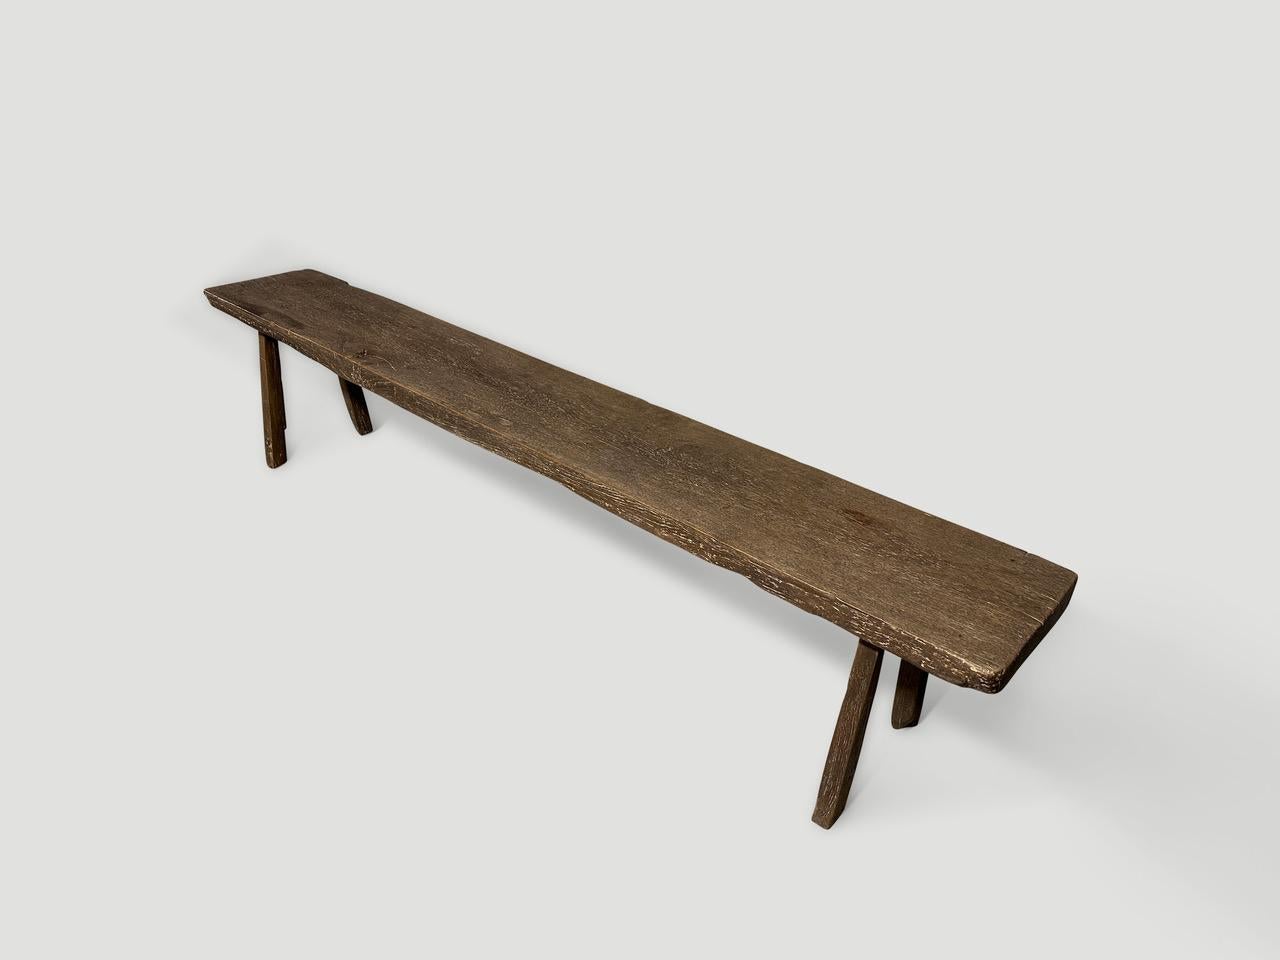 Antique bench hand made from a two inch thick single panel of teak wood with lovely character and patina. Circa 1950.

This bench was hand made in the spirit of Wabi-Sabi, a Japanese philosophy that beauty can be found in imperfection and